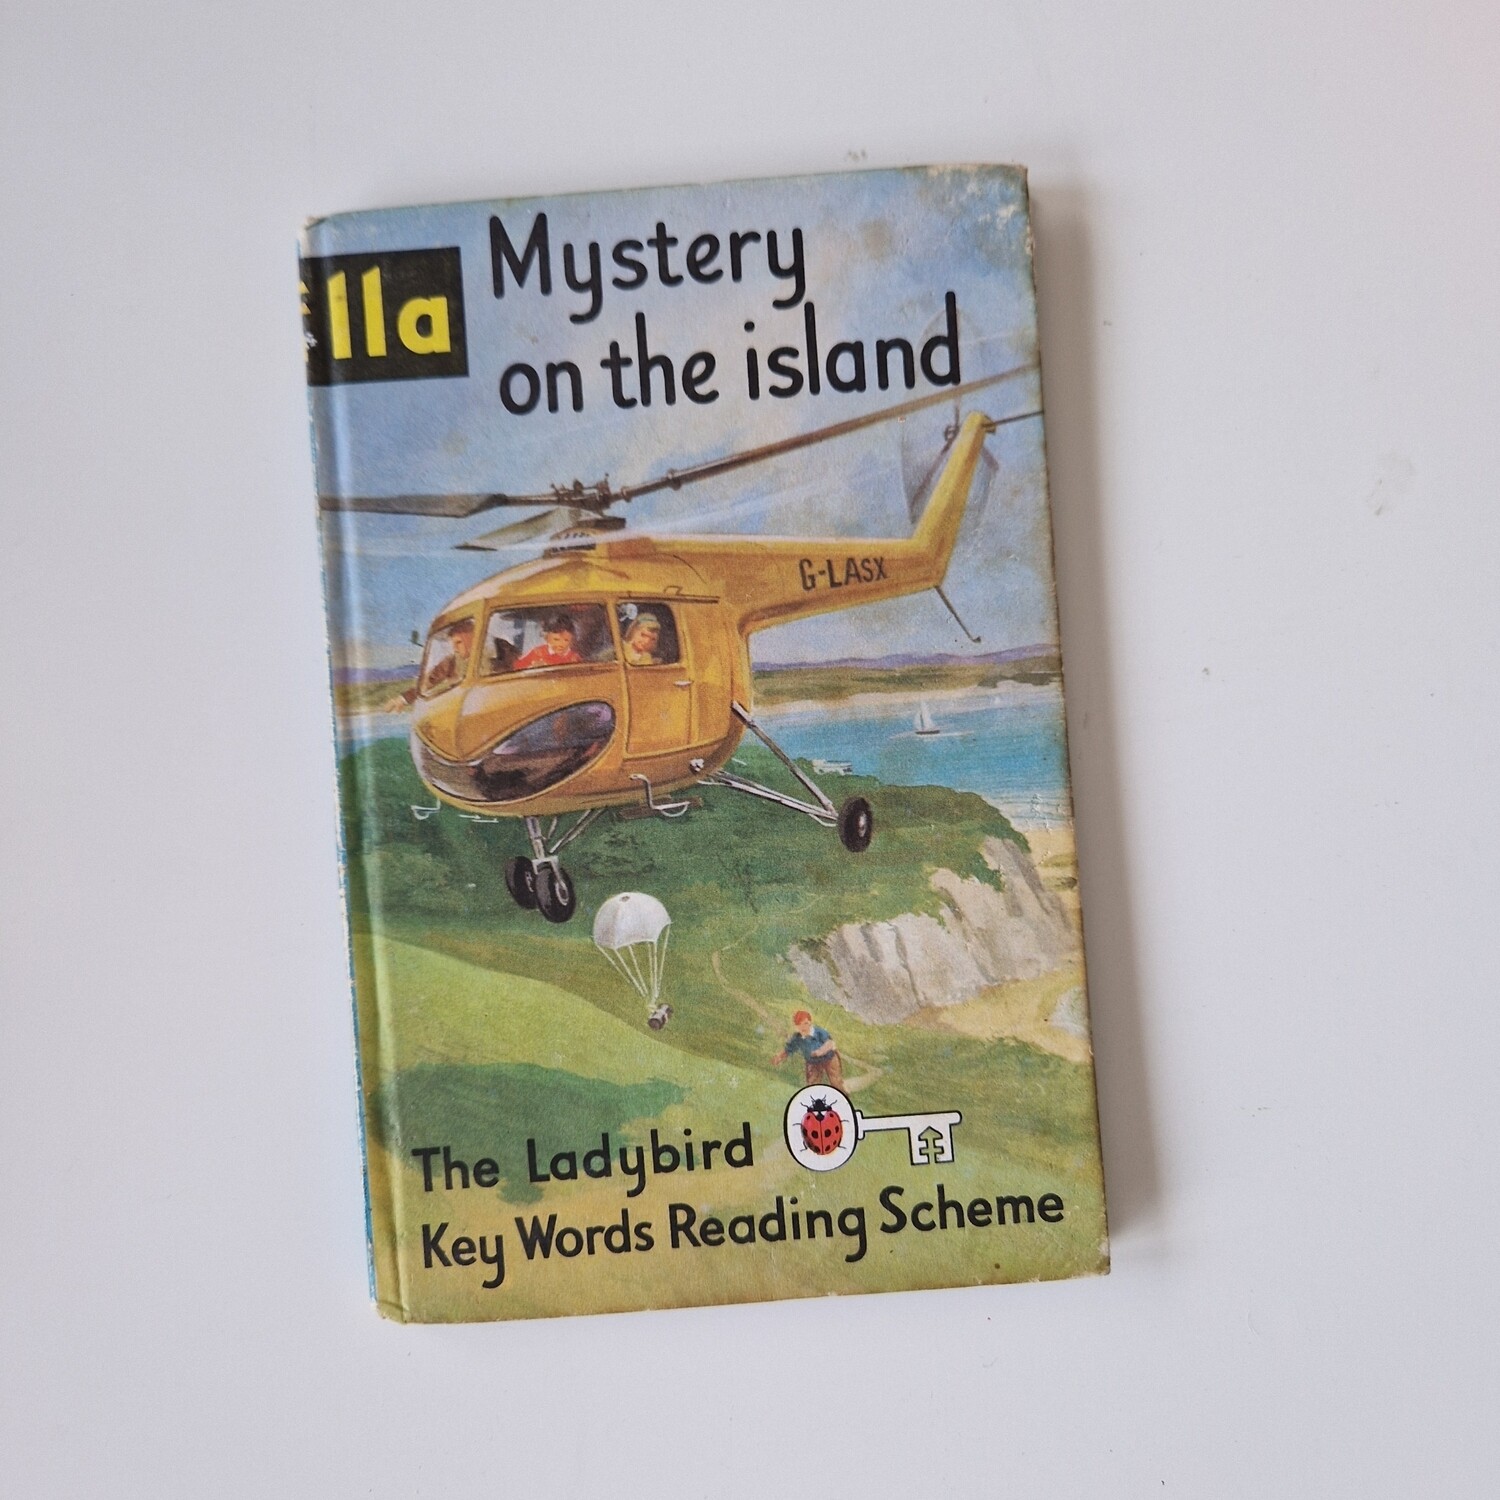 Mystery on the Island, helicopter - Peter & Jane Notebook - Ladybird book